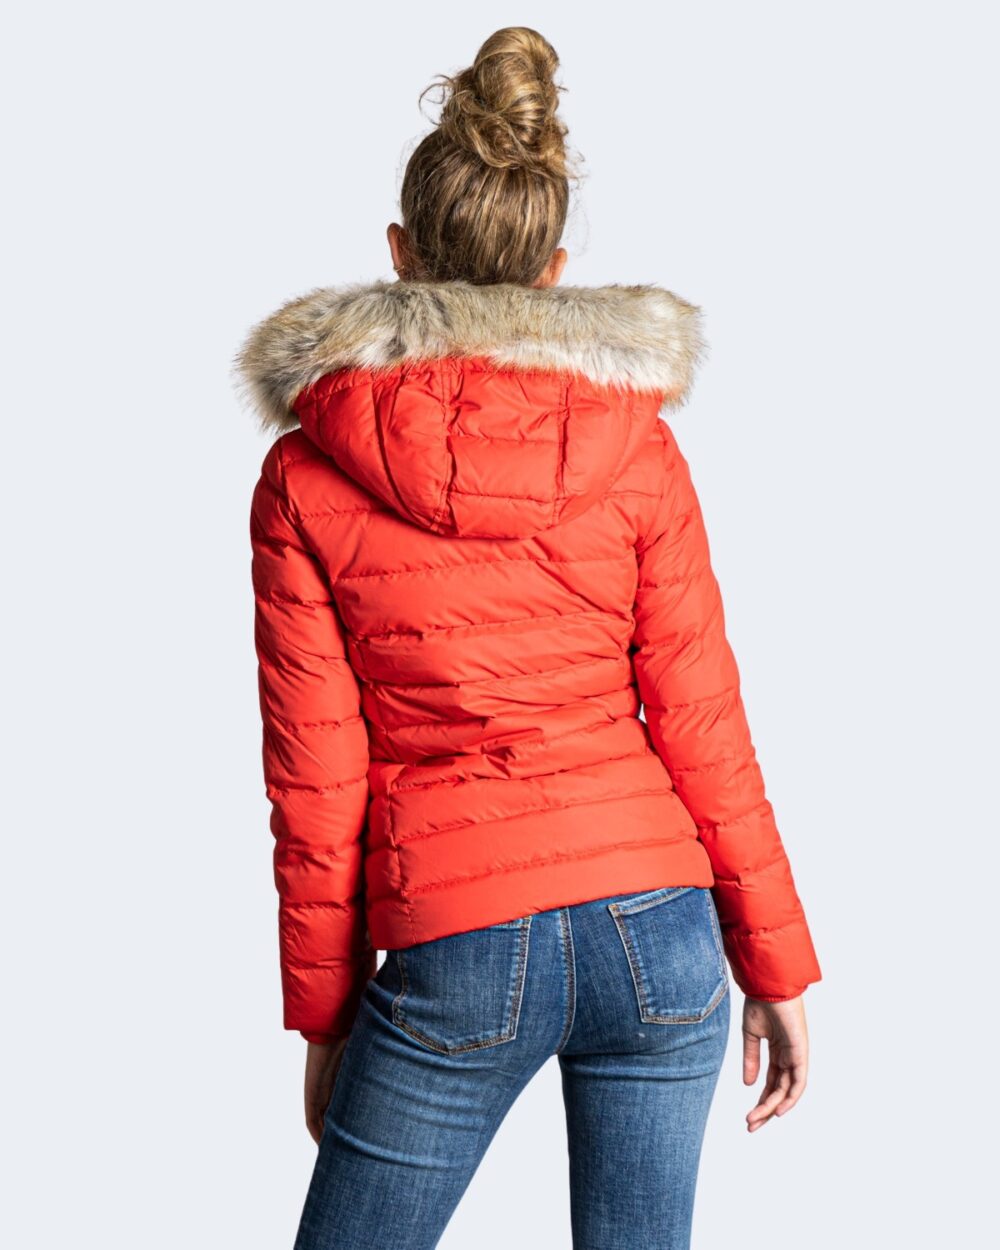 Piumino Tommy Hilfiger Jeans TJW BASIC HOODED Rosso - Foto 3